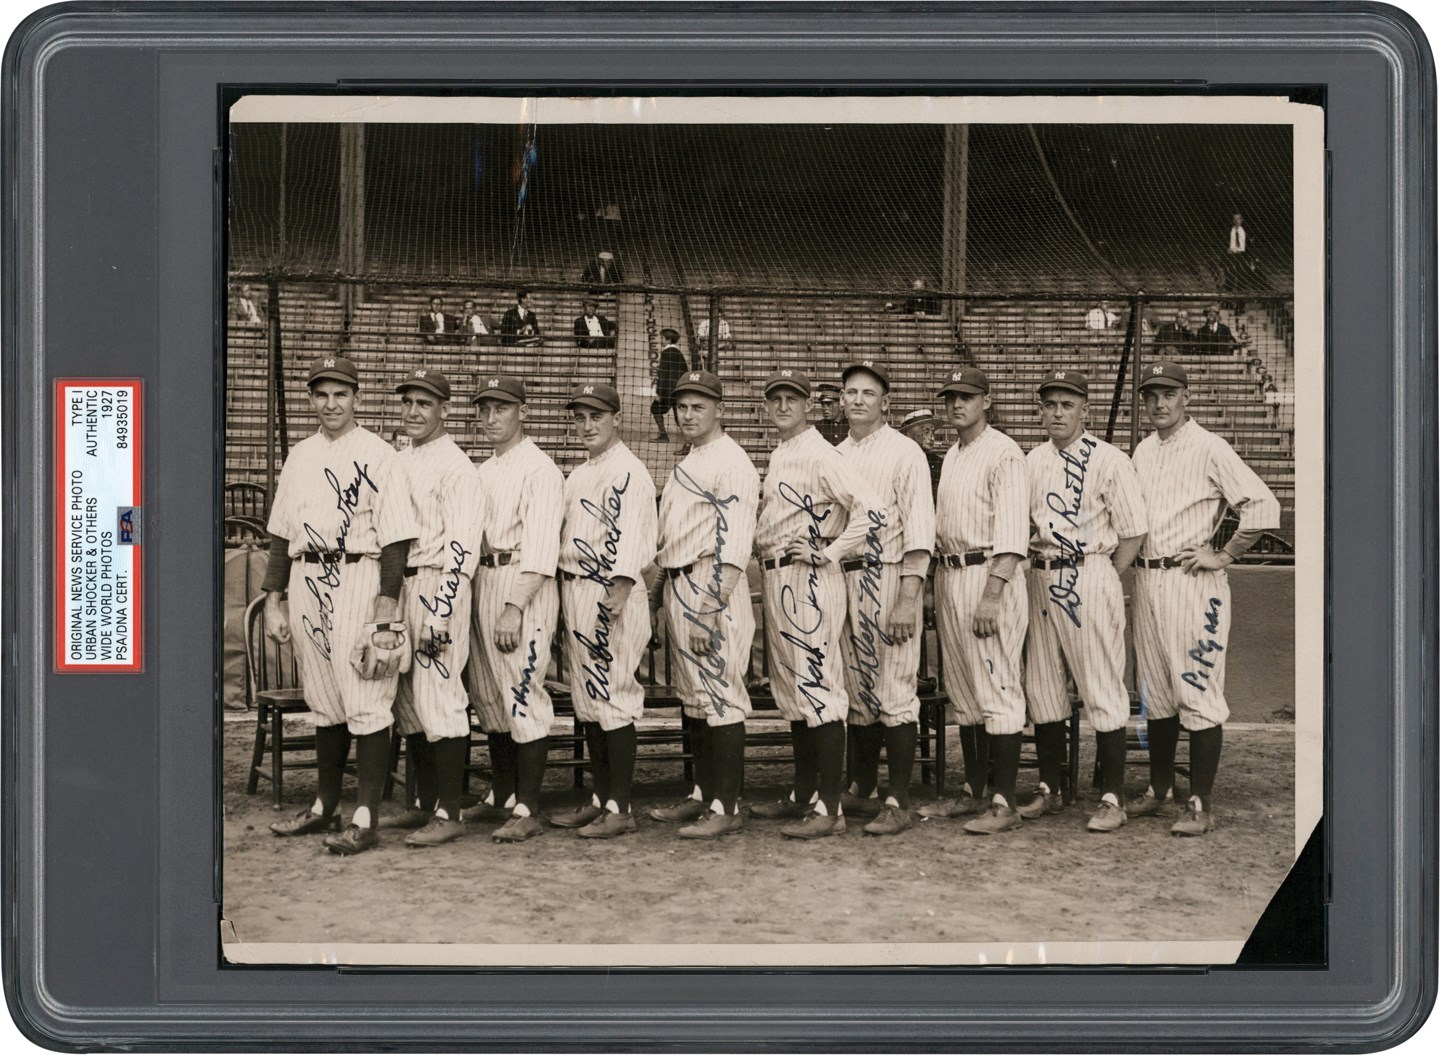 Baseball Autographs - 1927 New York Yankees Pitching Staff Signed Photograph with Shocker and Giard (PSA Type I with Authentic Signatures)